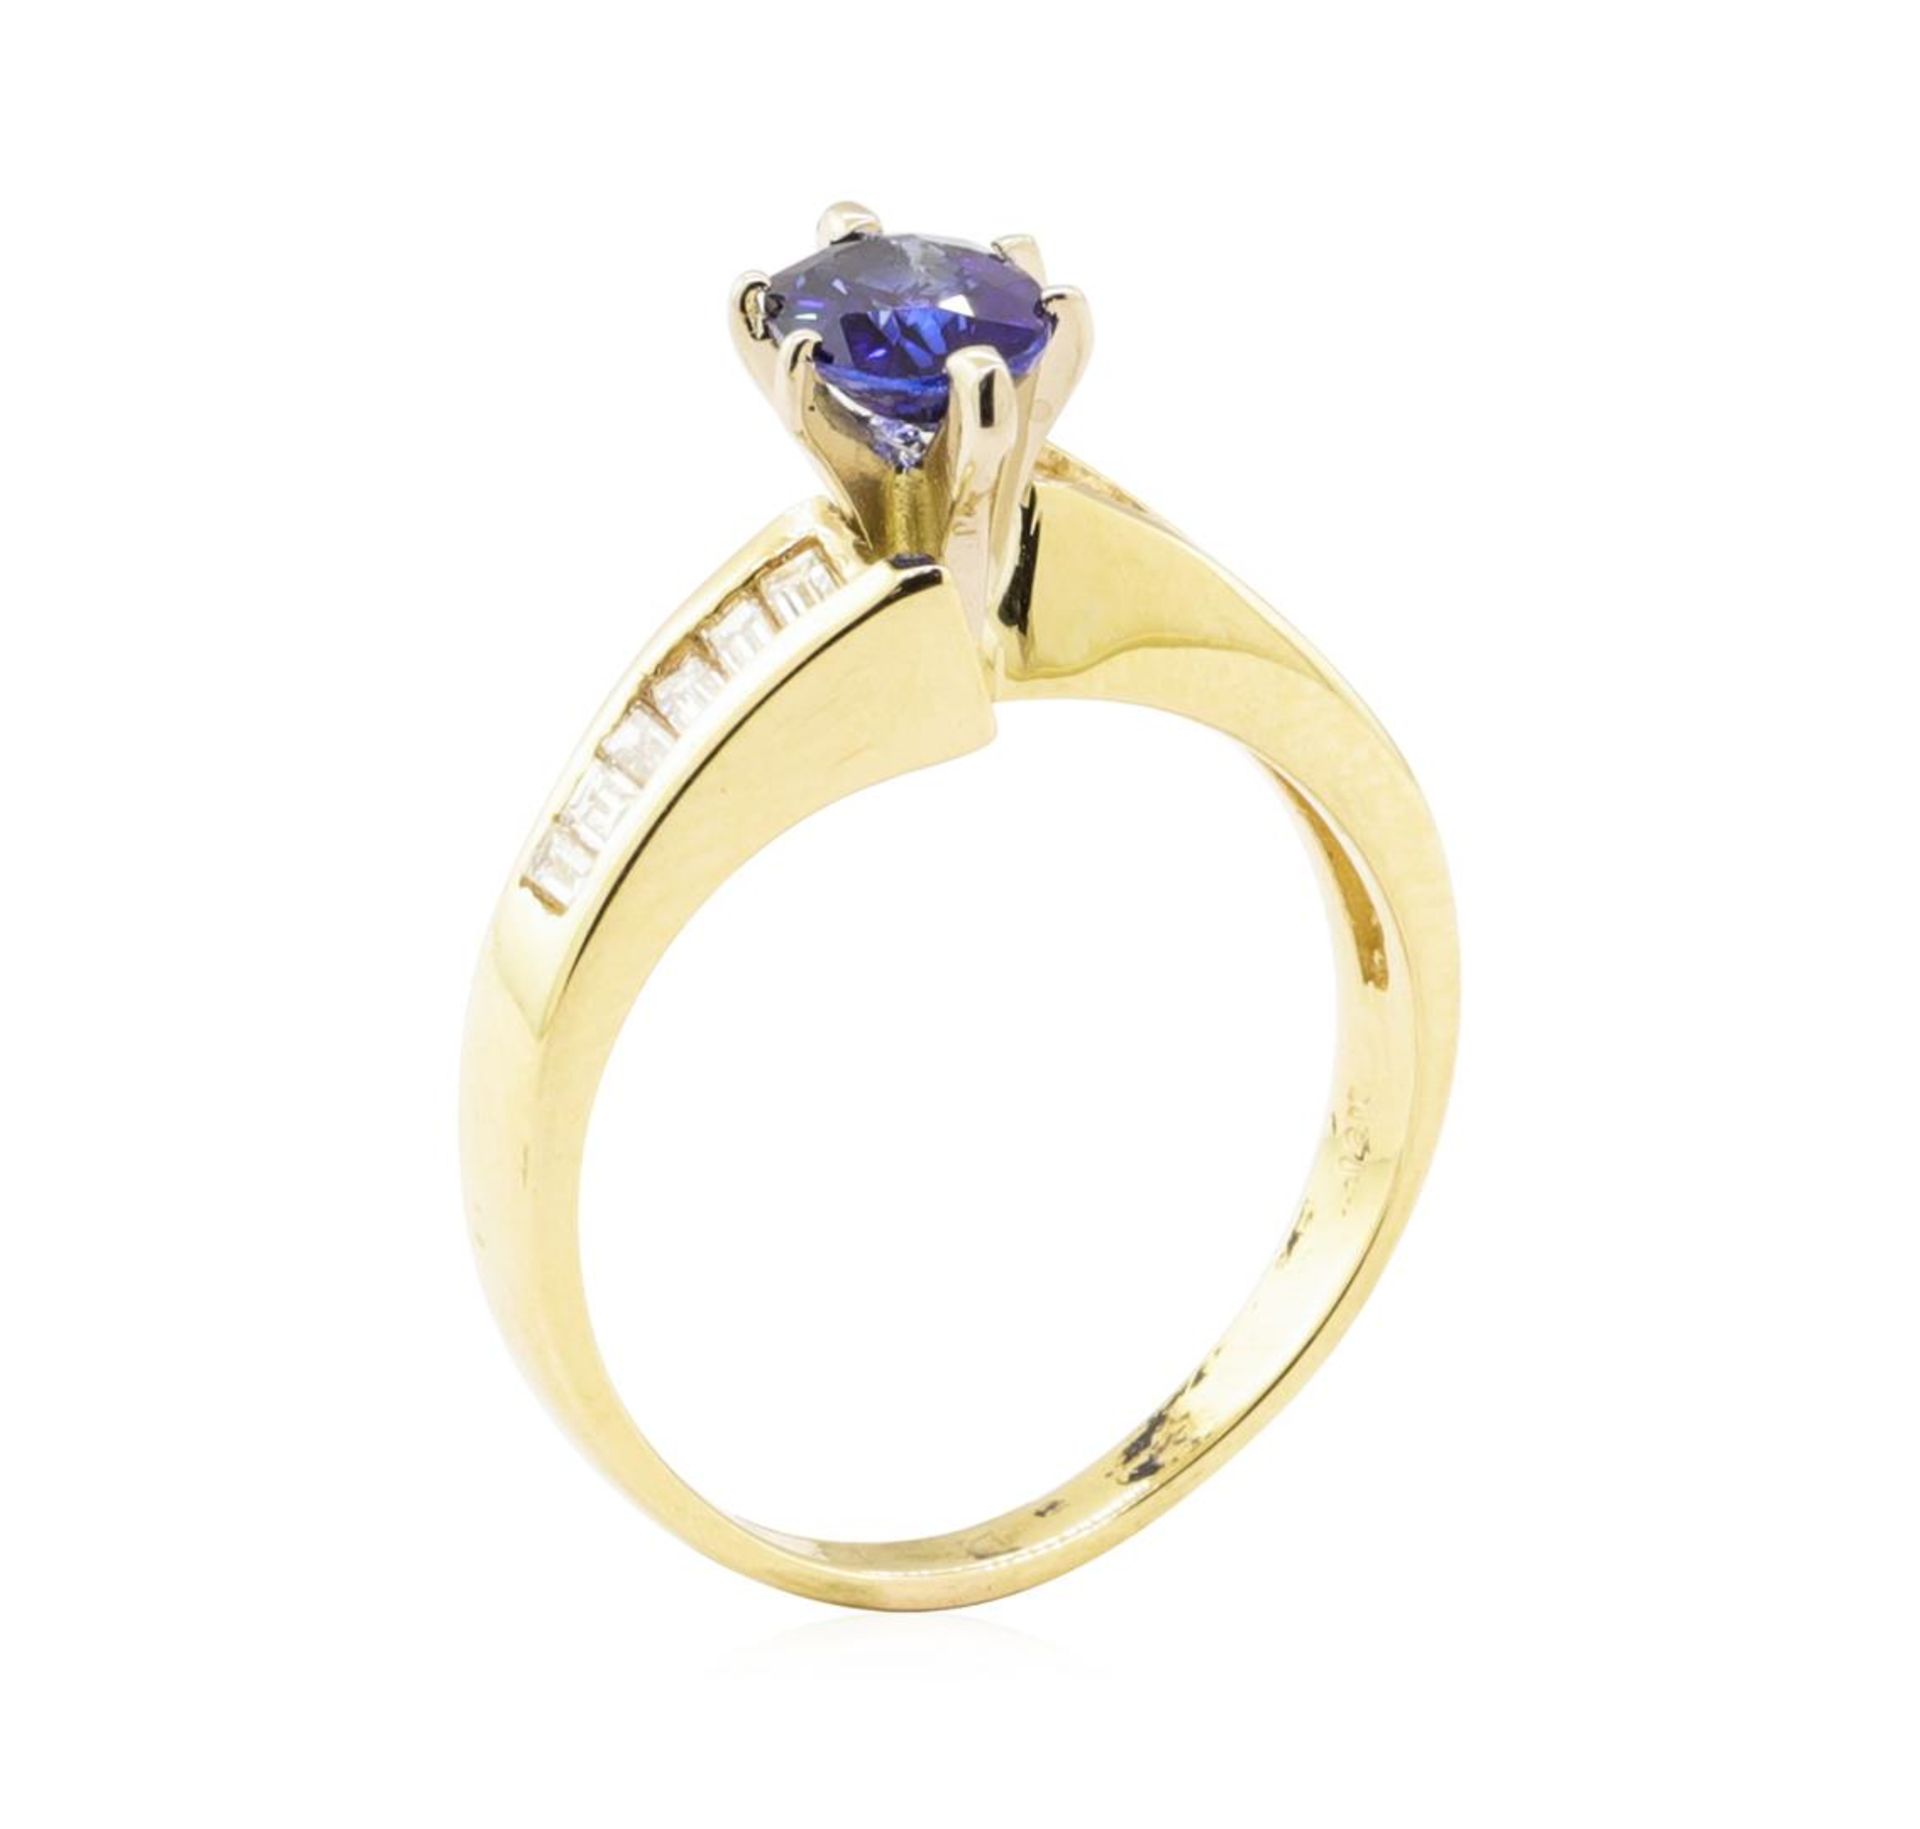 1.38 ctw Blue Sapphire and Diamond Ring - 14KT Yellow Gold - Image 4 of 4